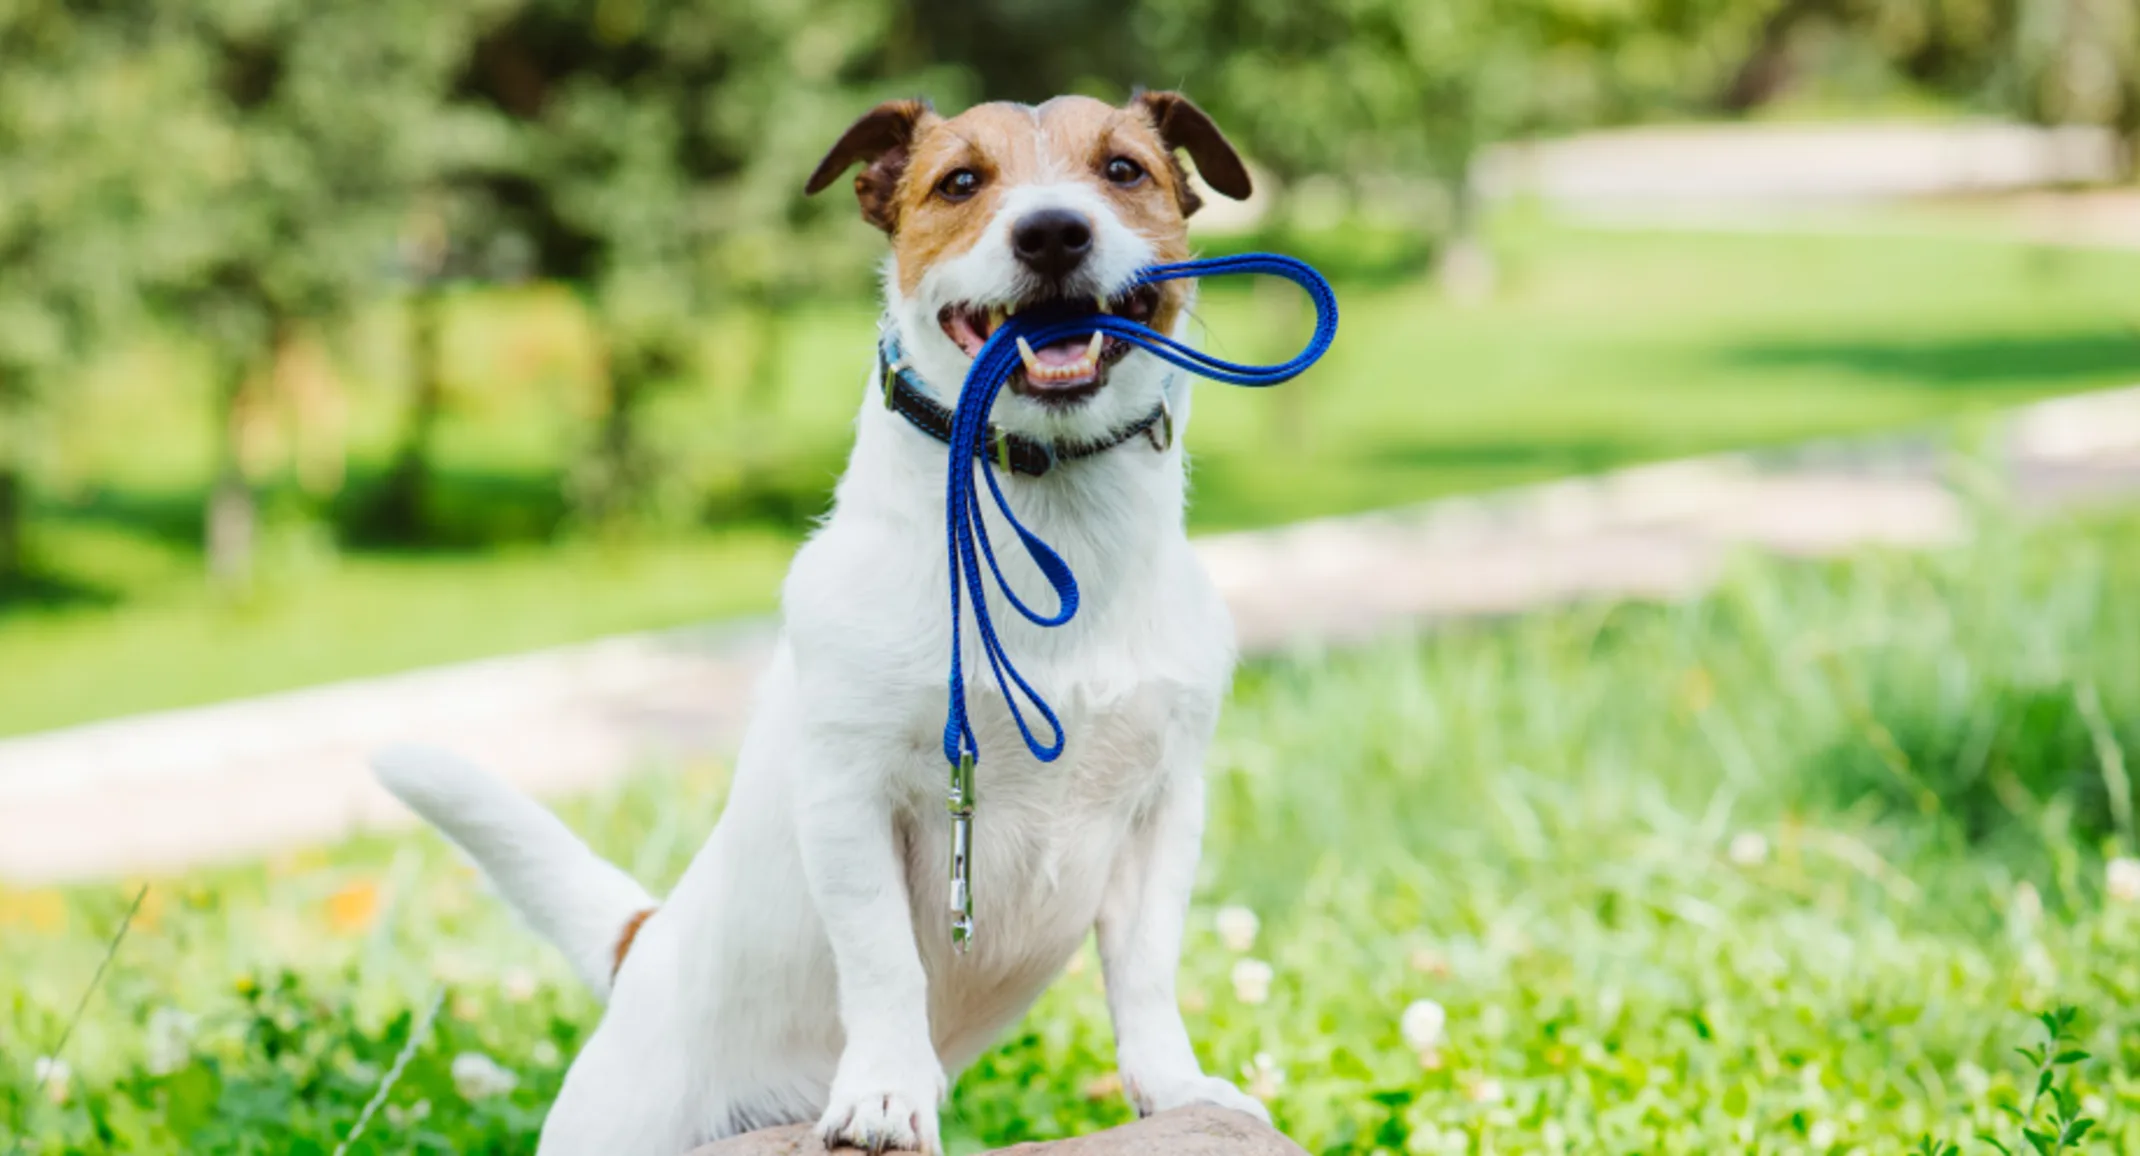 Small white dog holding a blue leash in its mouth standing on a rock in a grassy field.